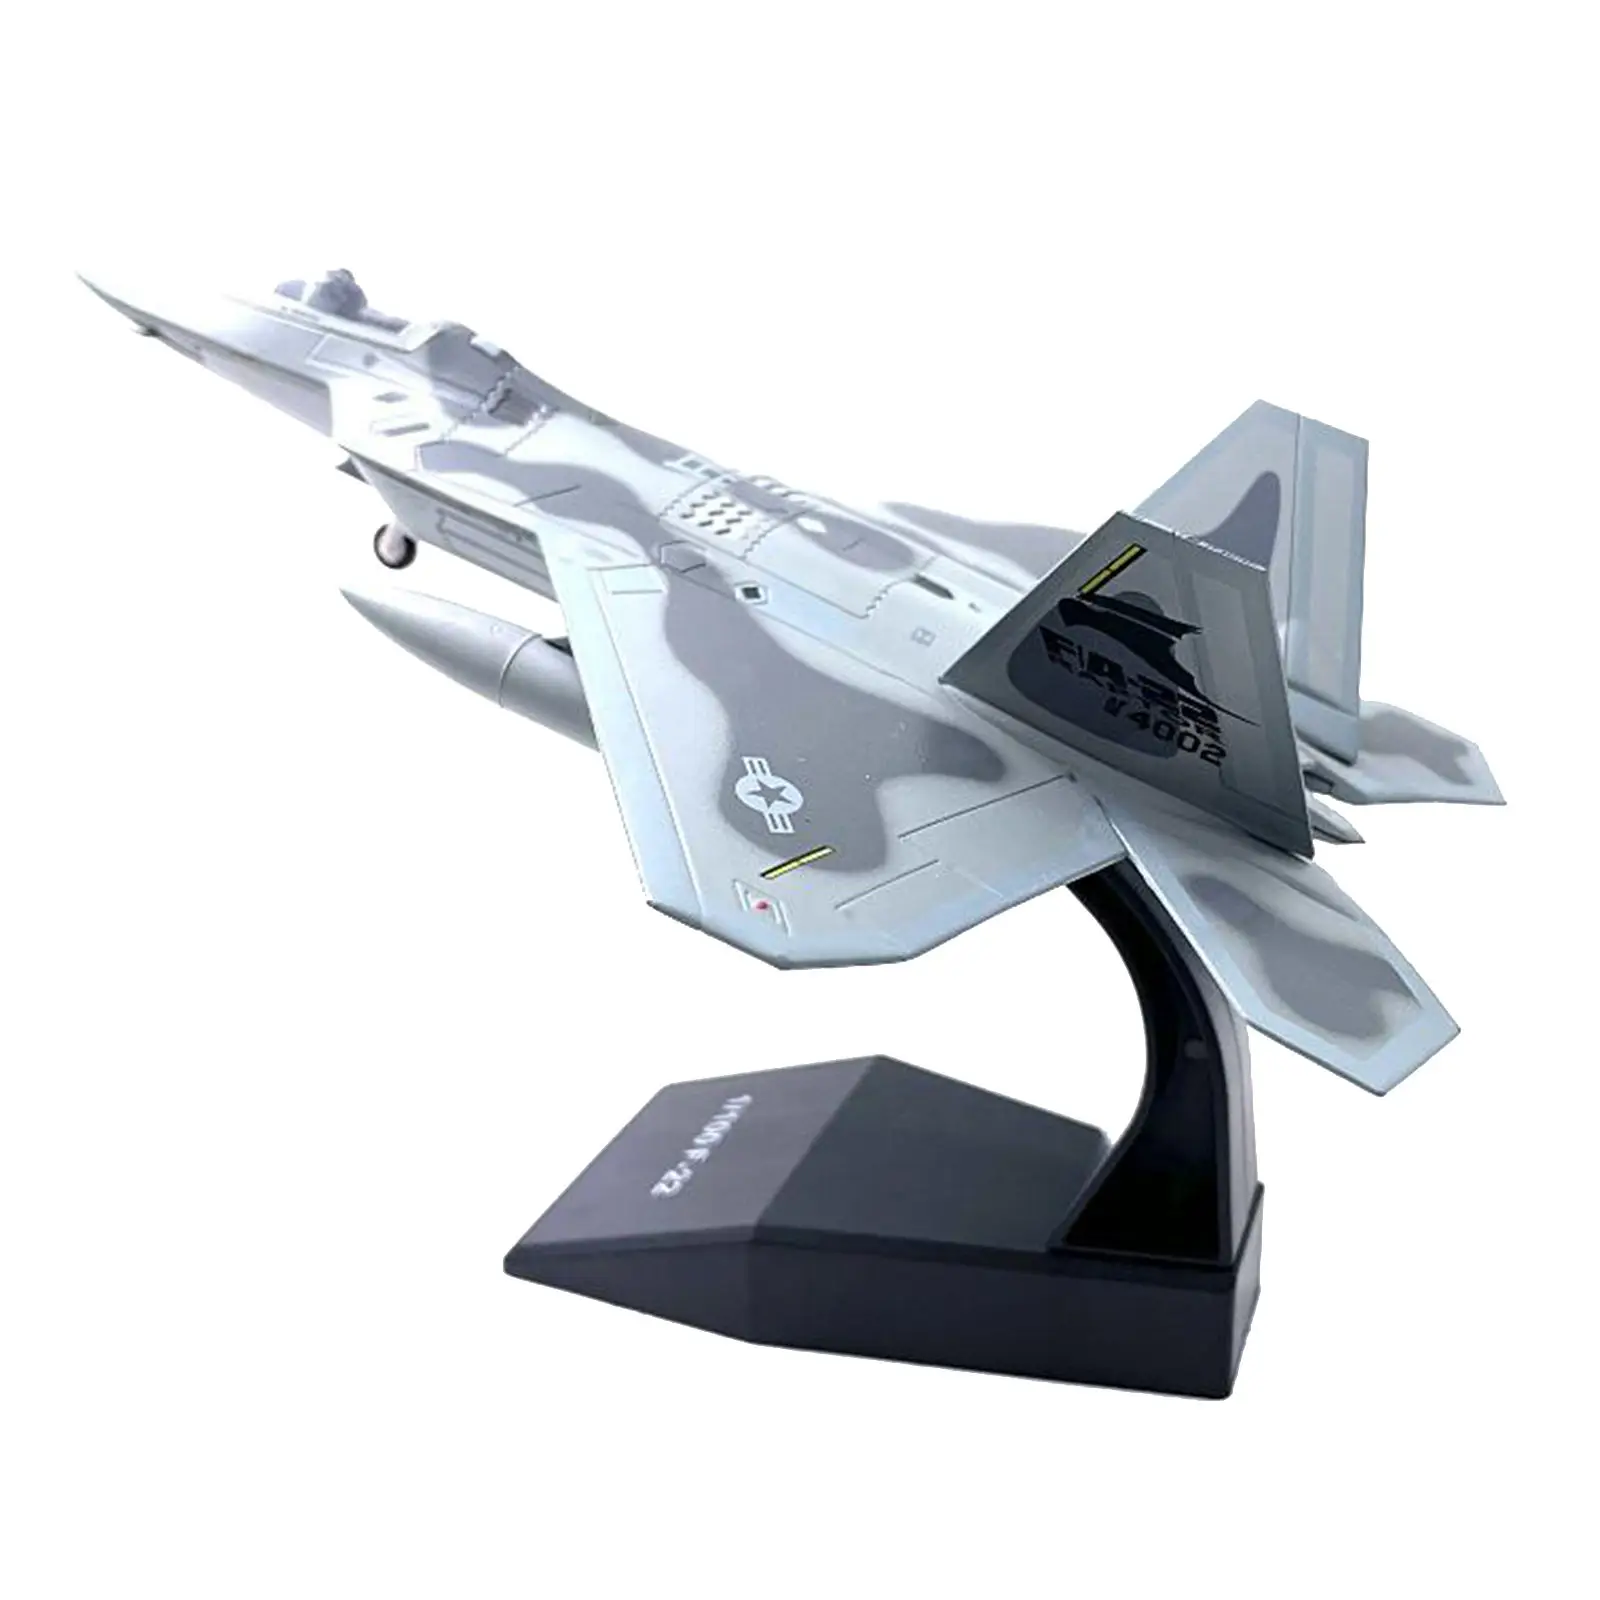 1/100 Scale Diecast Alloy F-22 Raptor Plane USA Airline Fighter Aircraft Model